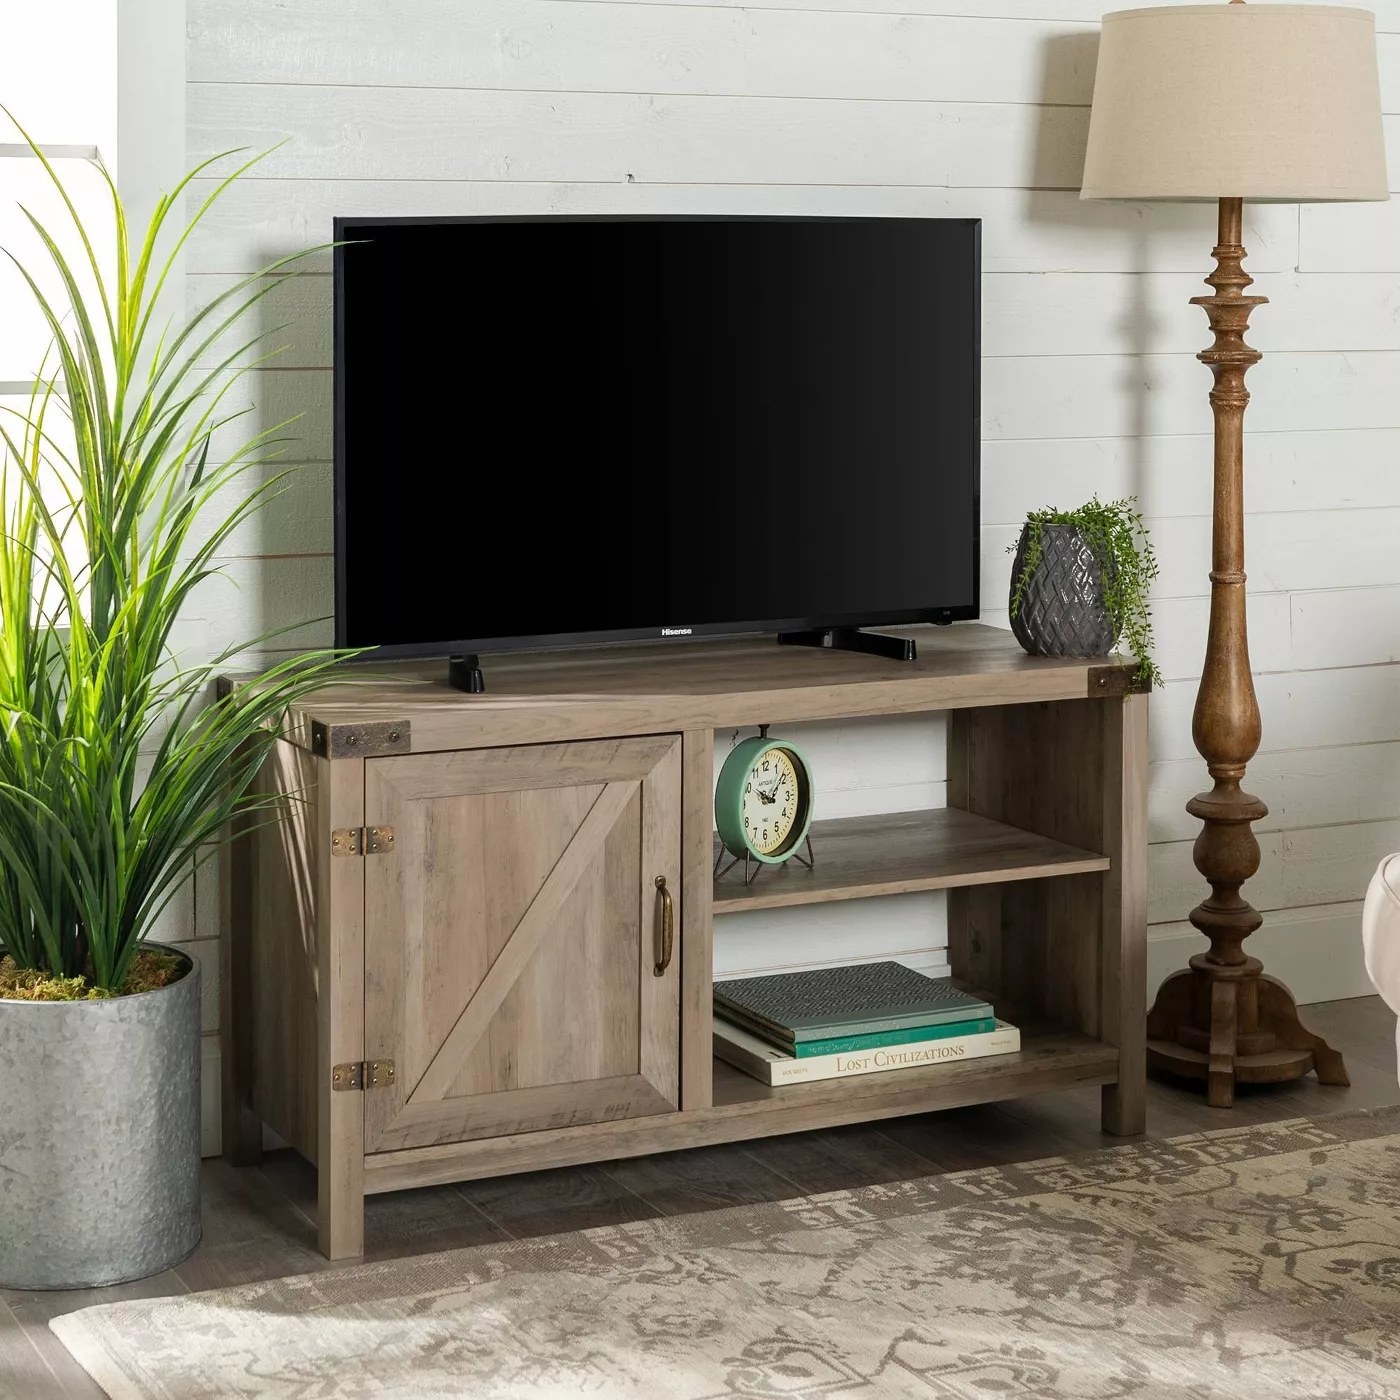 The TV stand in gray